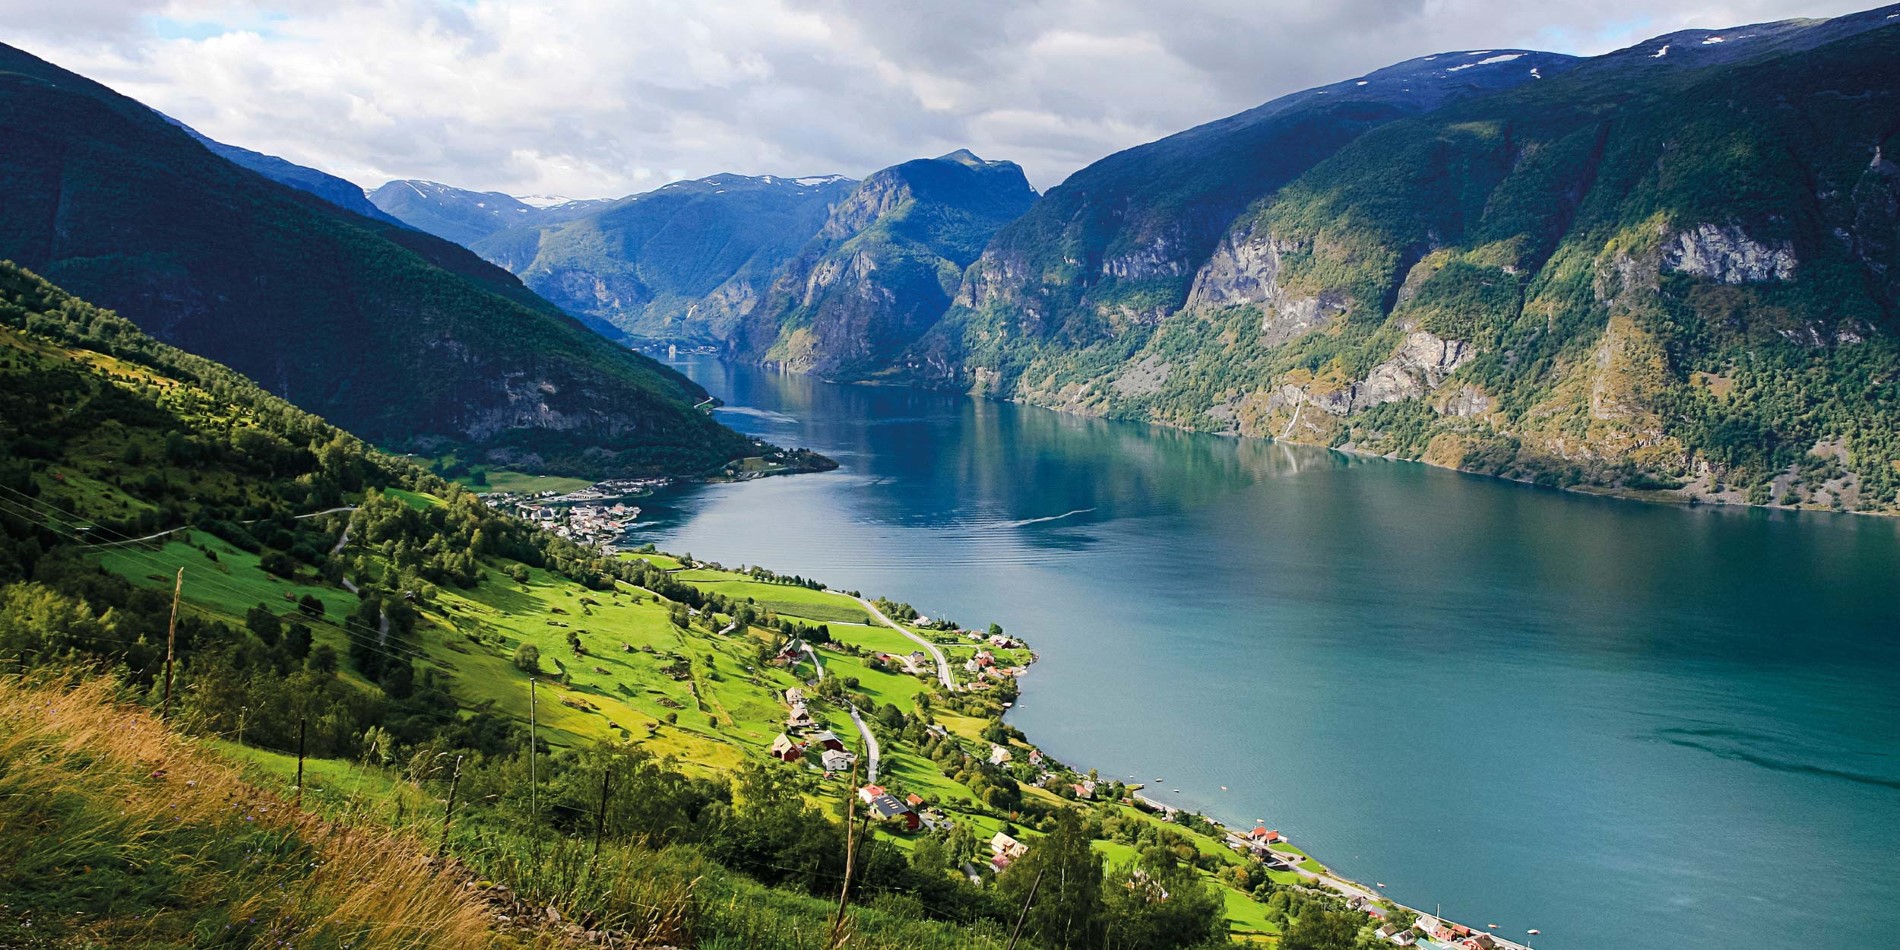 Sognefjord, the longest and deepest fjord in Norway